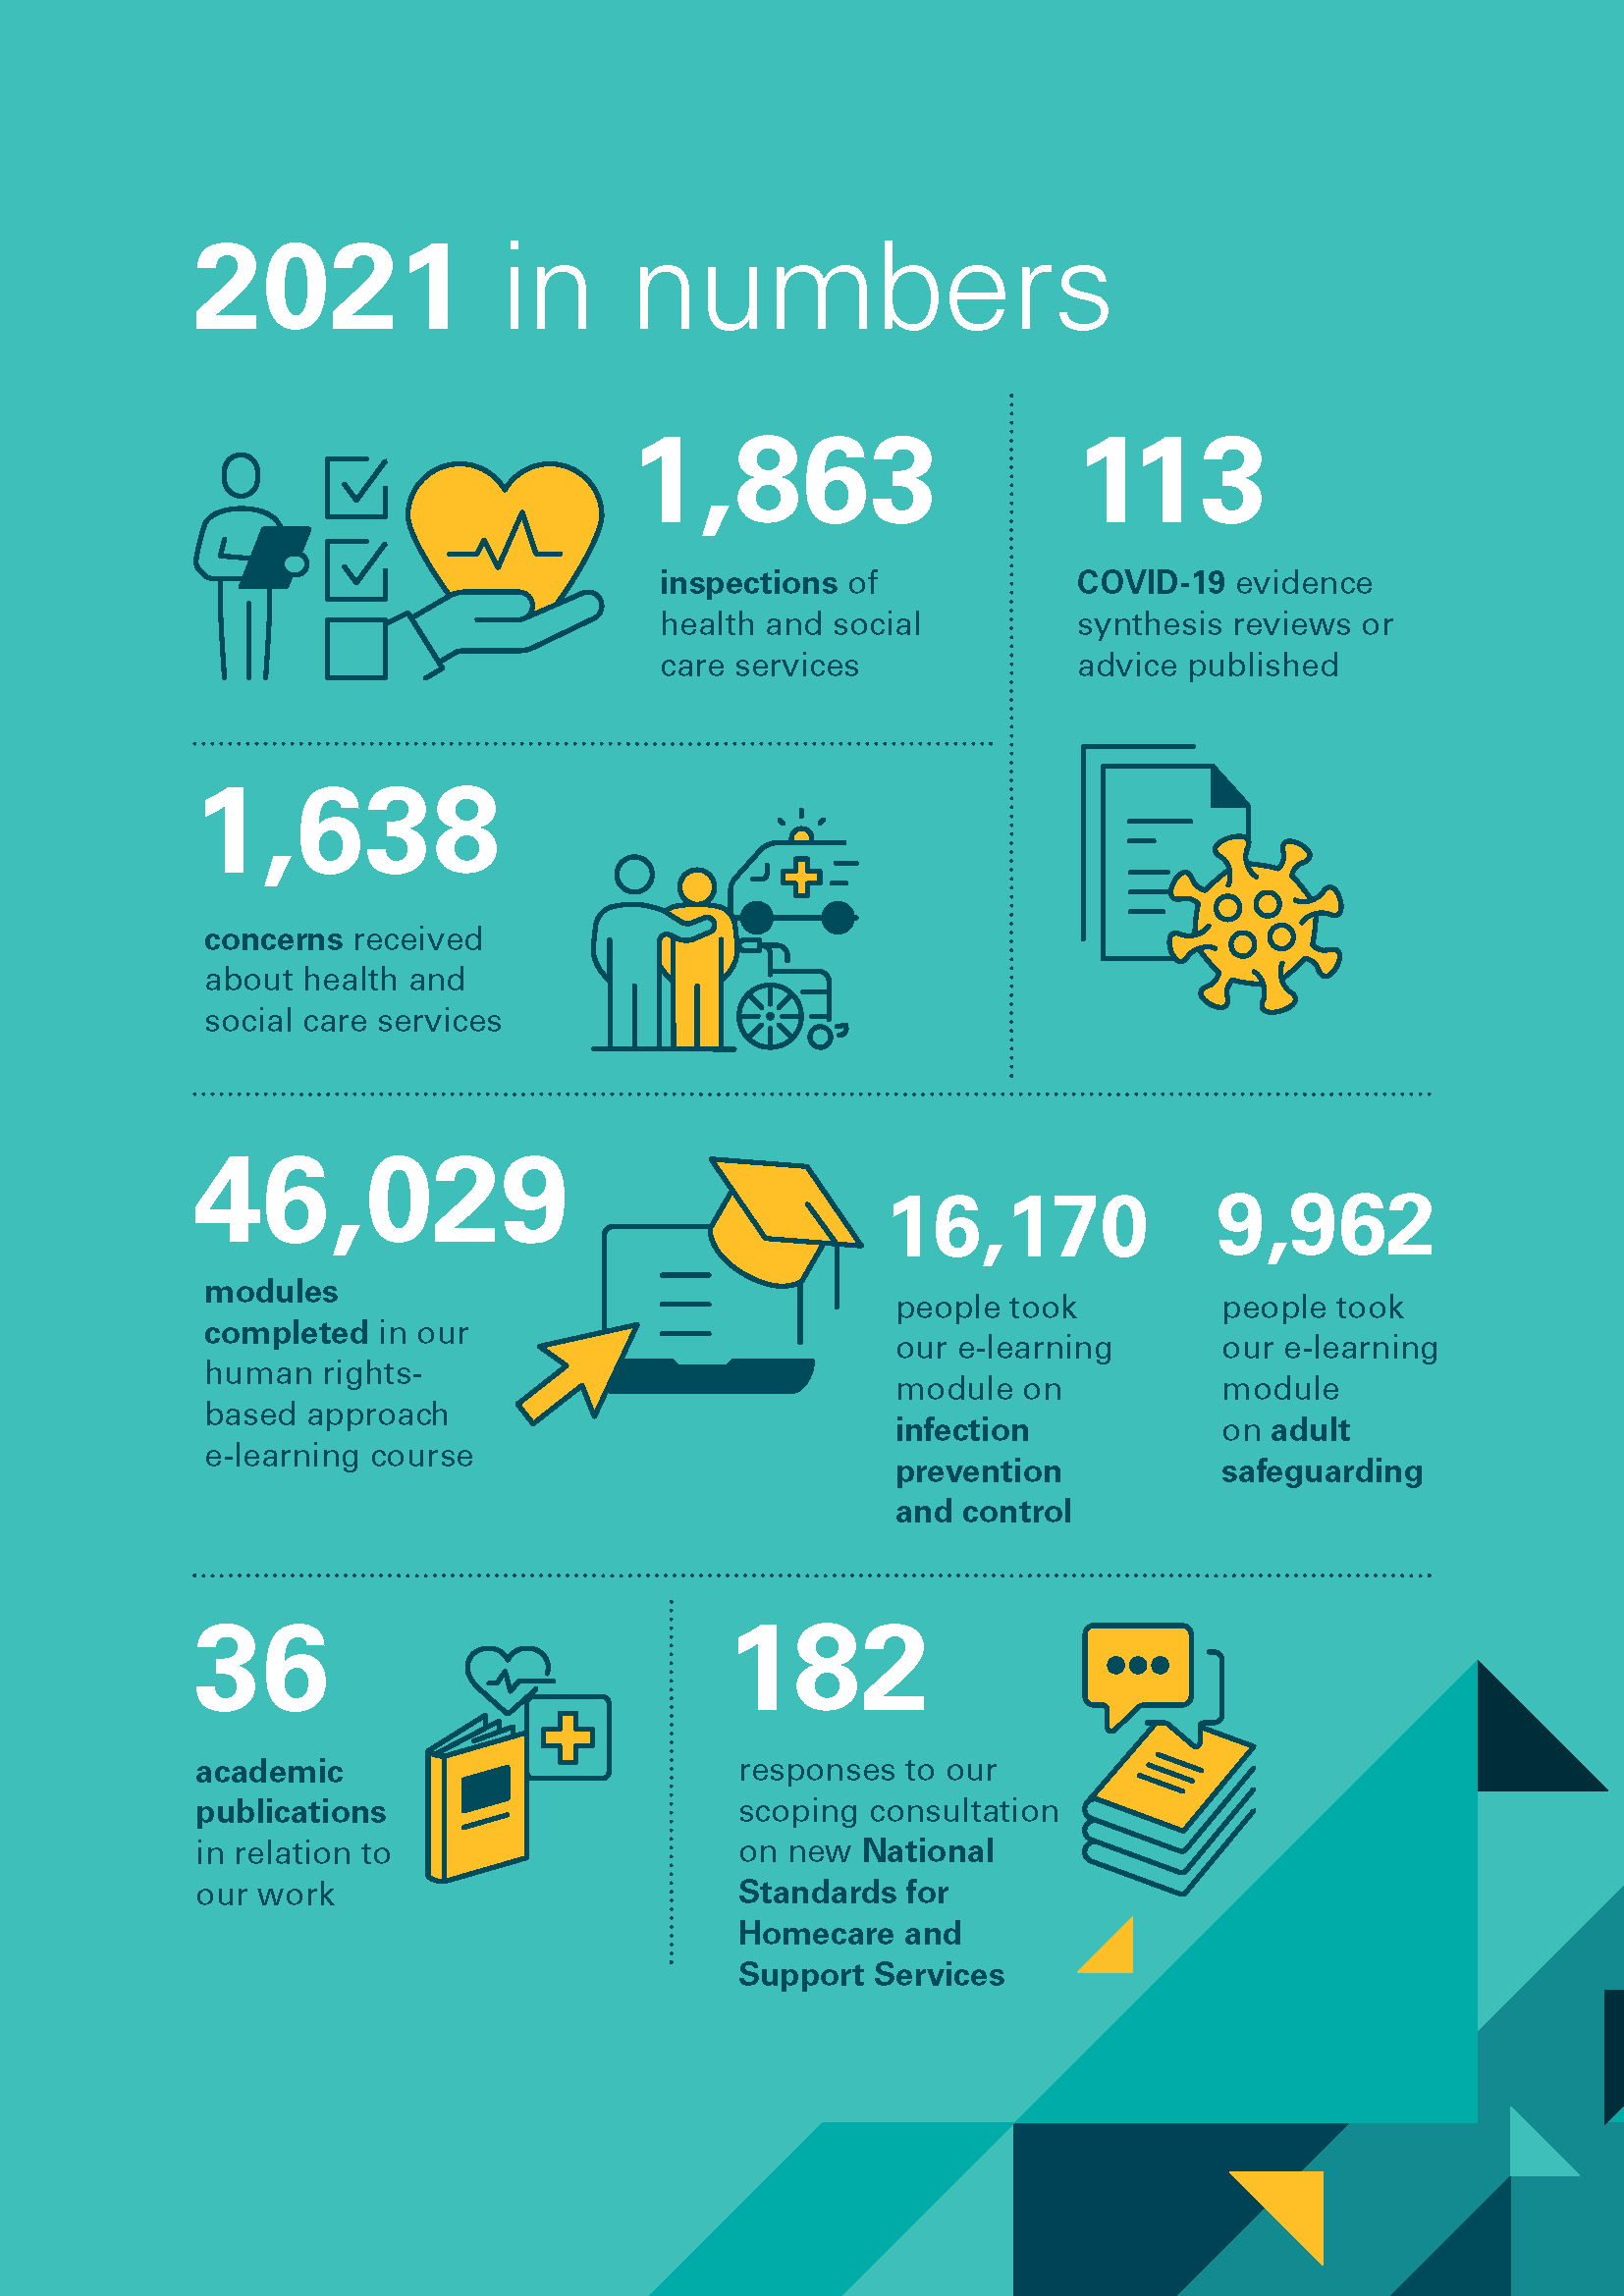 Summary infographic of the annual report called 2021 in numbers. 1,863 inspections of health and social services. 113 evidence synthesis reviews or advice. 46,029 people completed a module in Applying a Human Rights-Based Approach in Health and Social Care course.